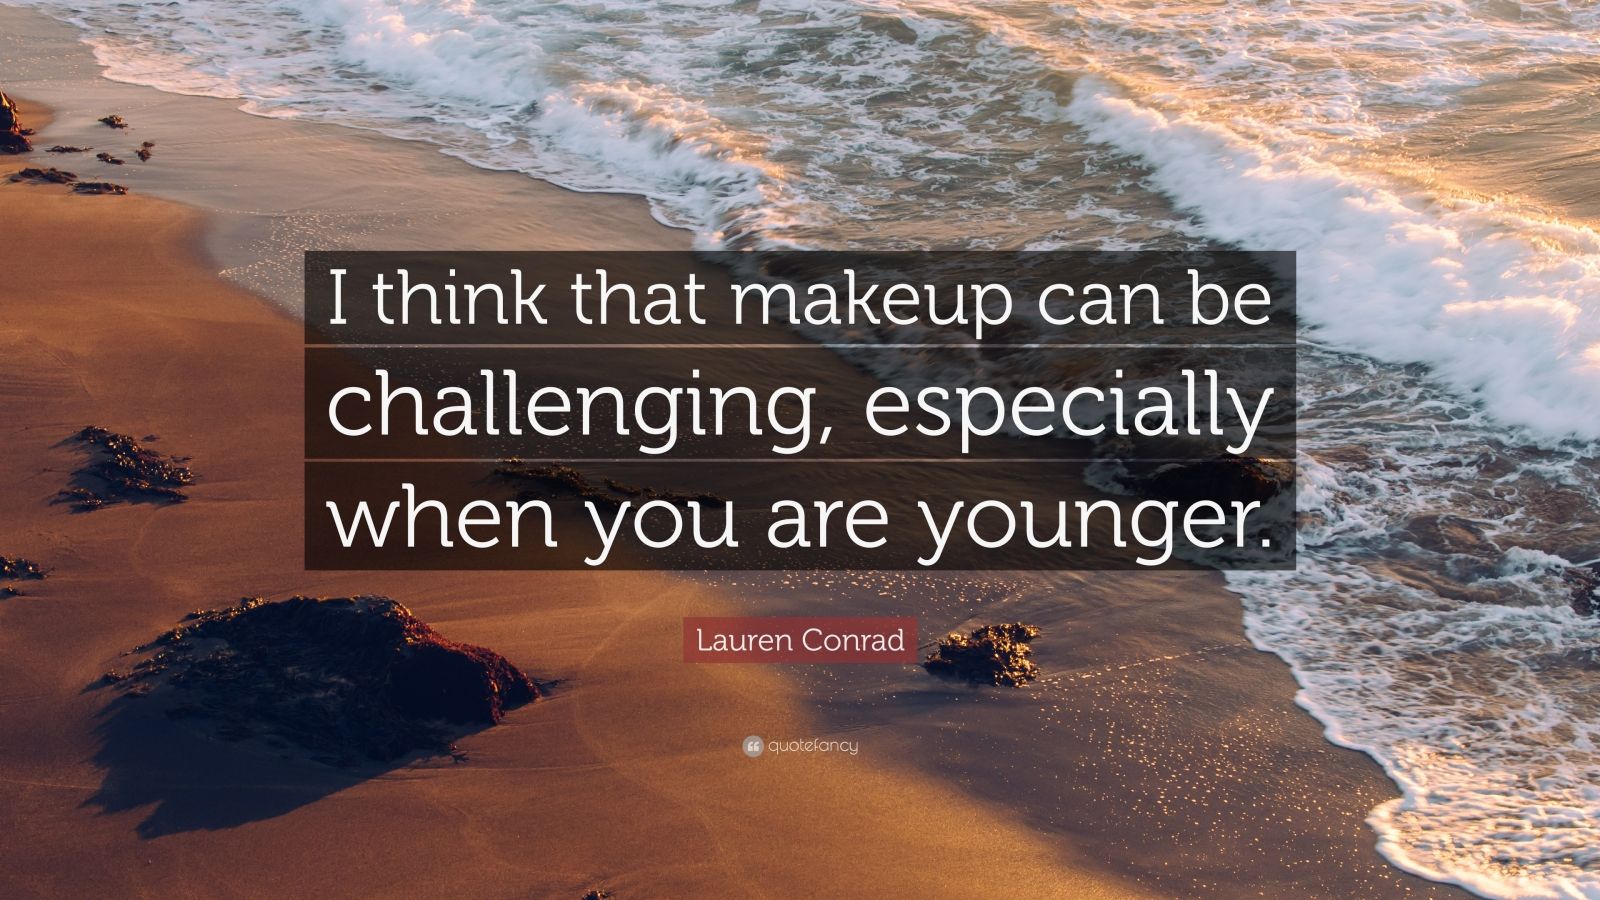 Lauren Conrad Quote: “I think that makeup can be challenging